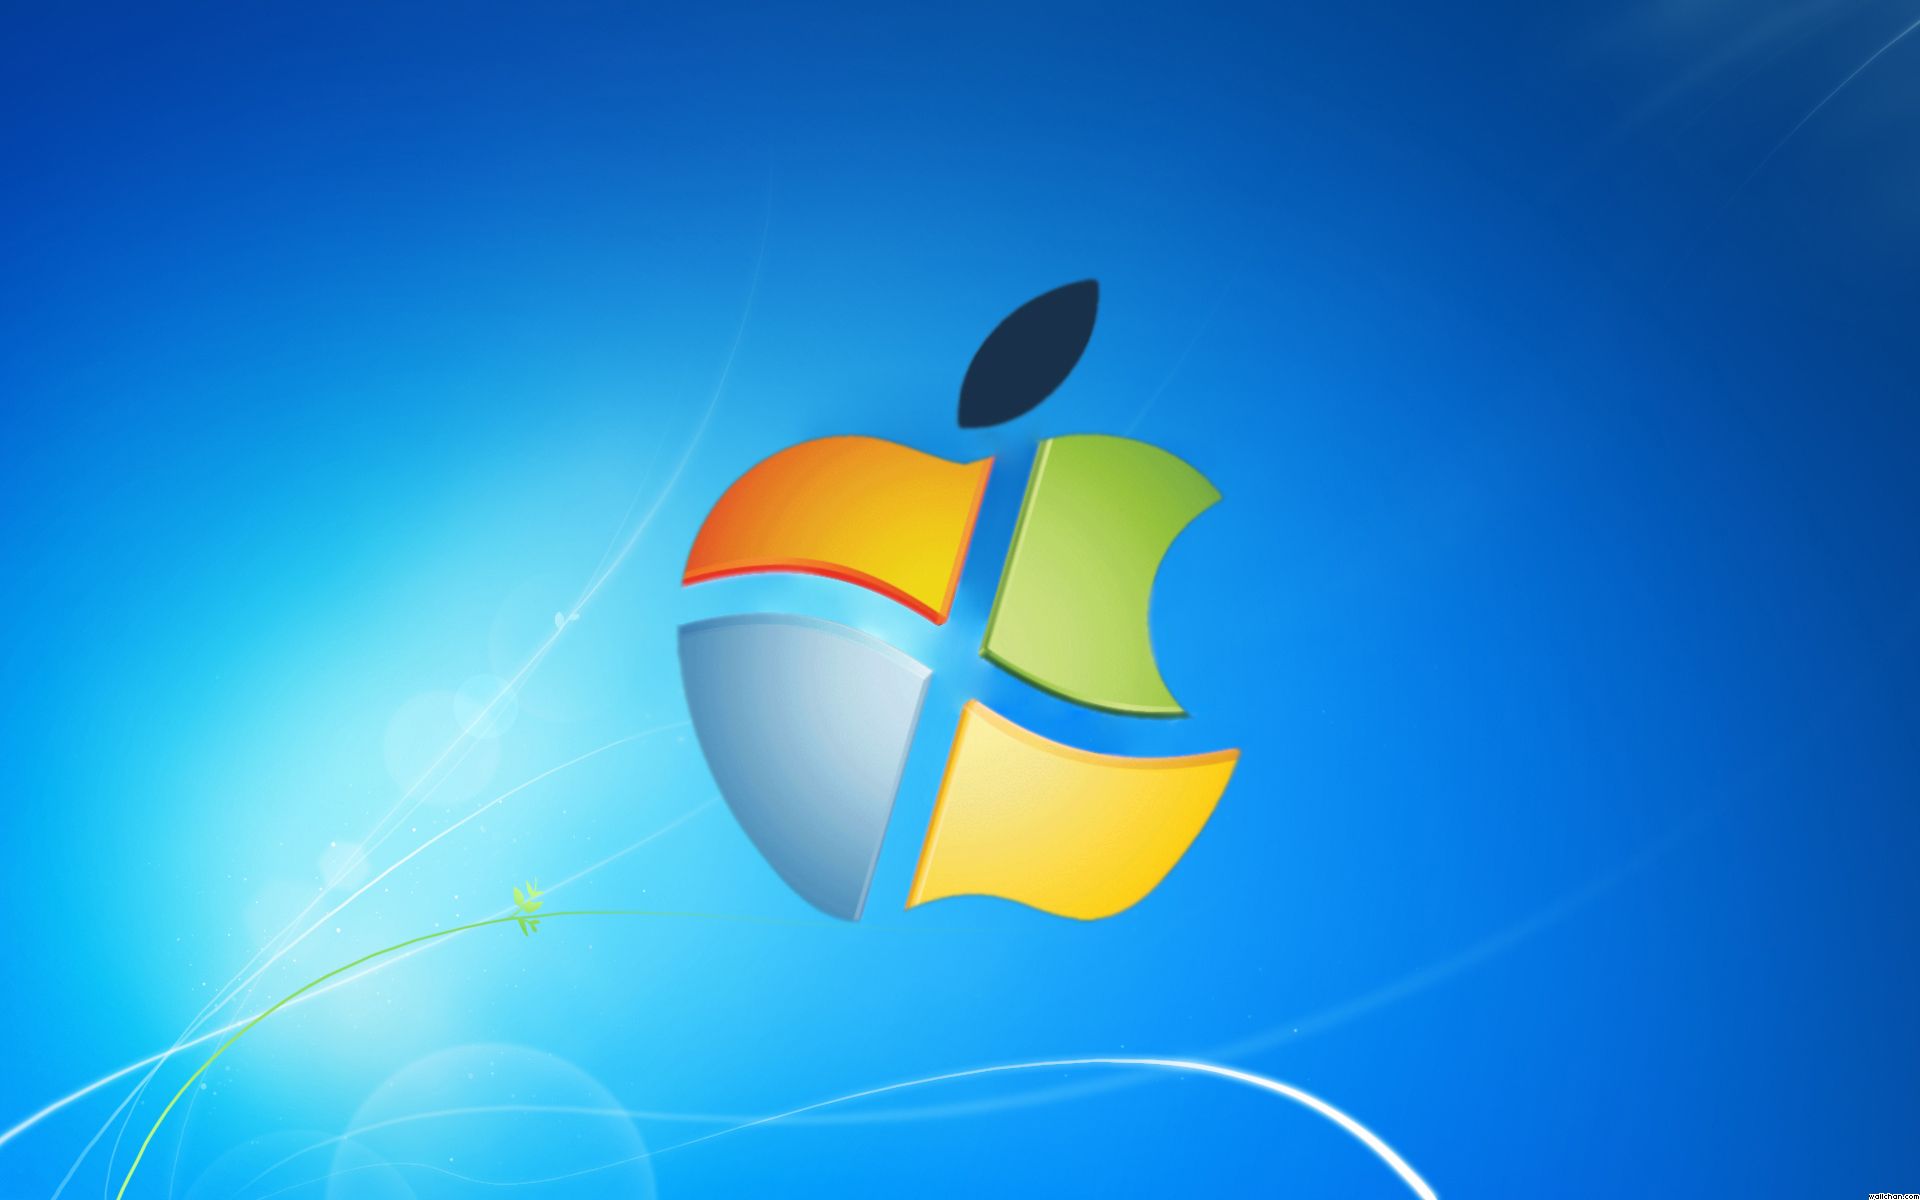 Download apple photos for windows free win 7 iso download